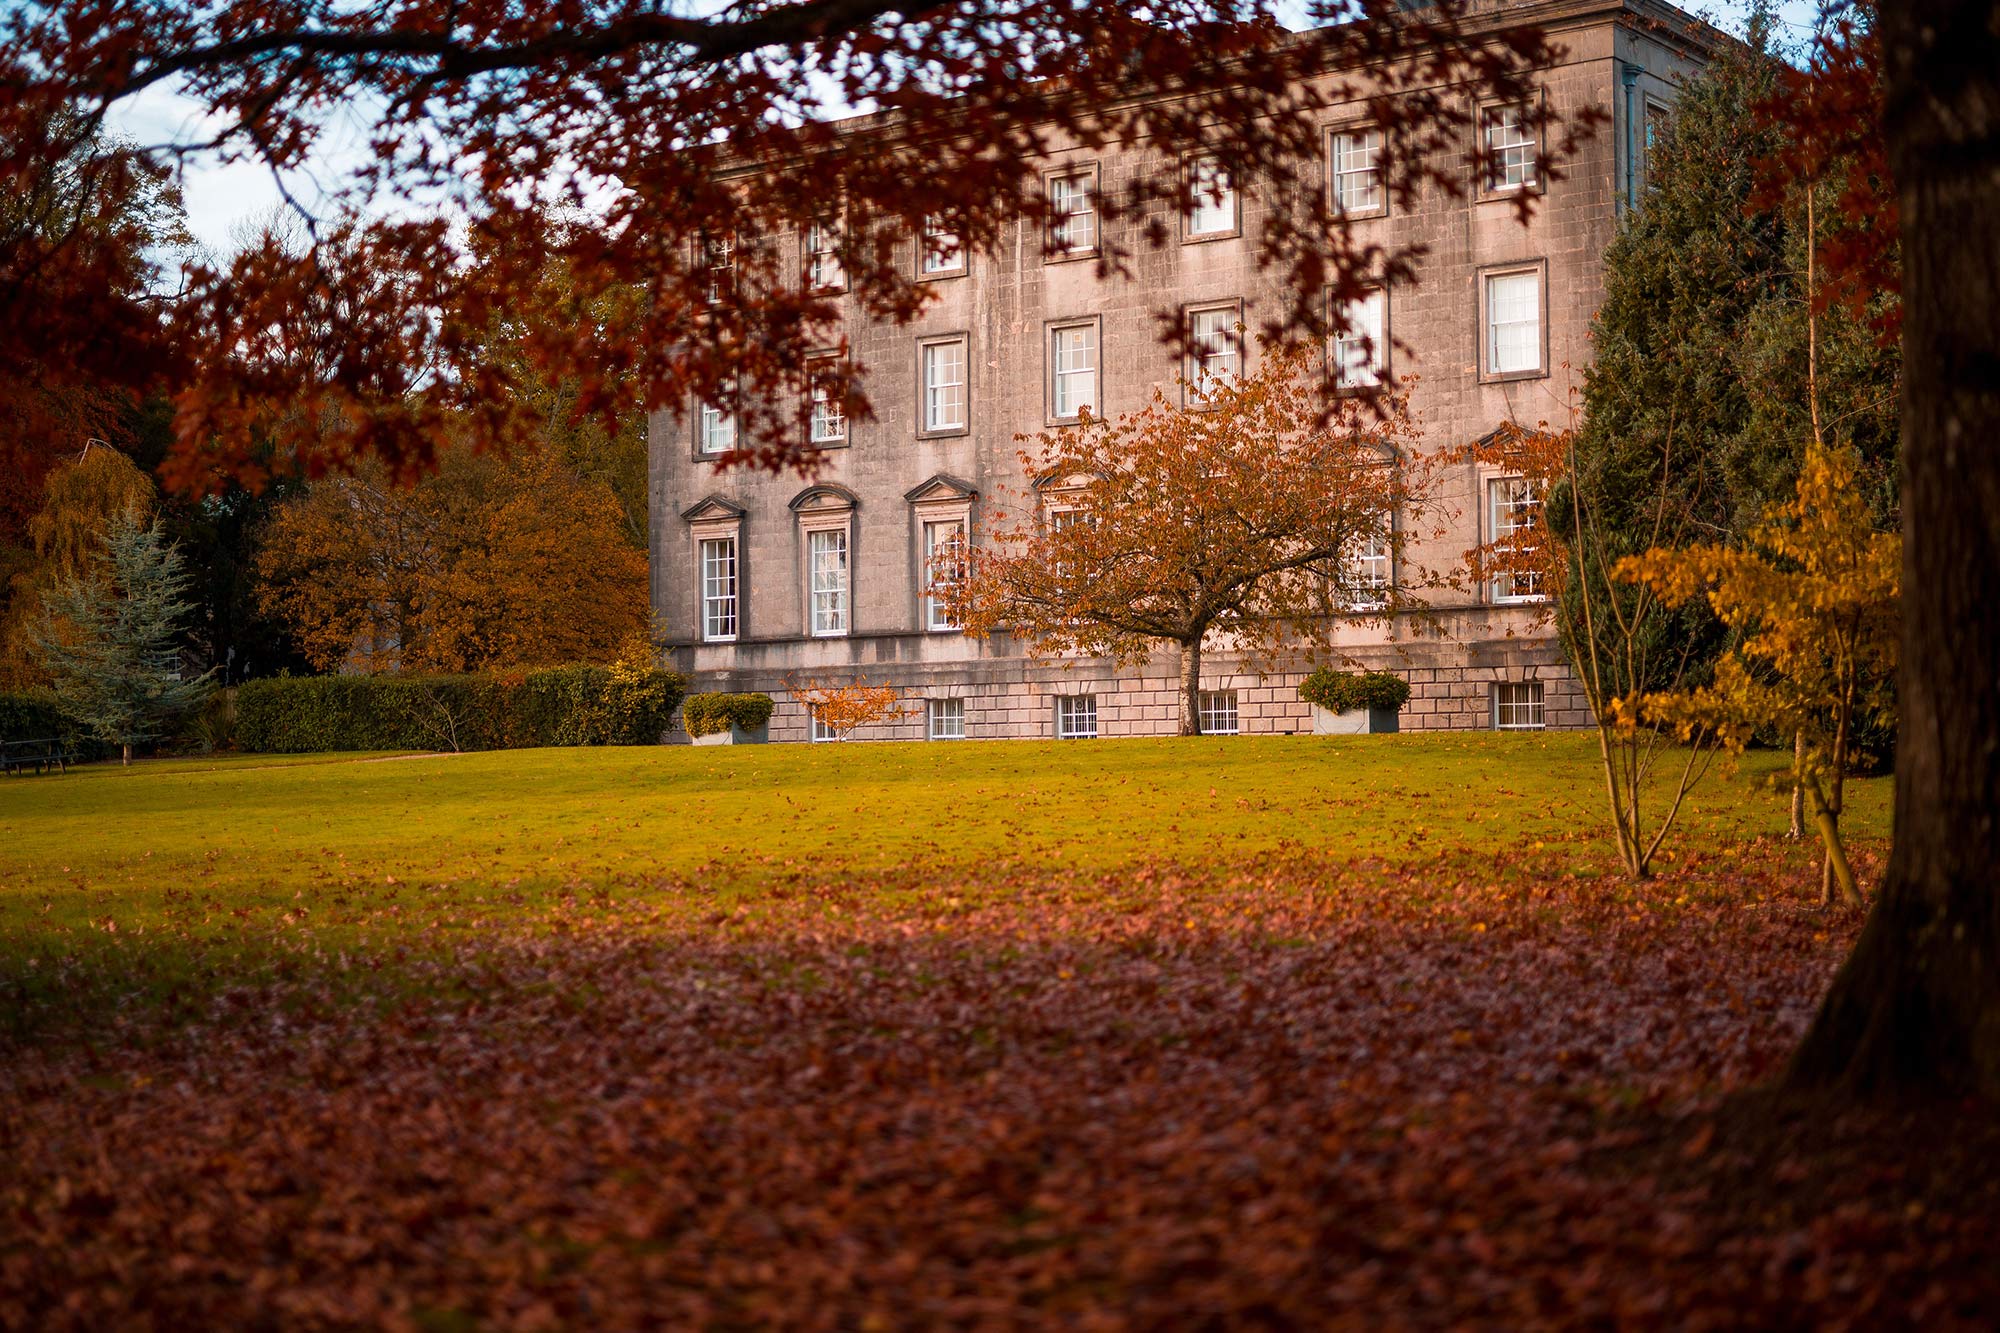 Autumn Image of Armagh